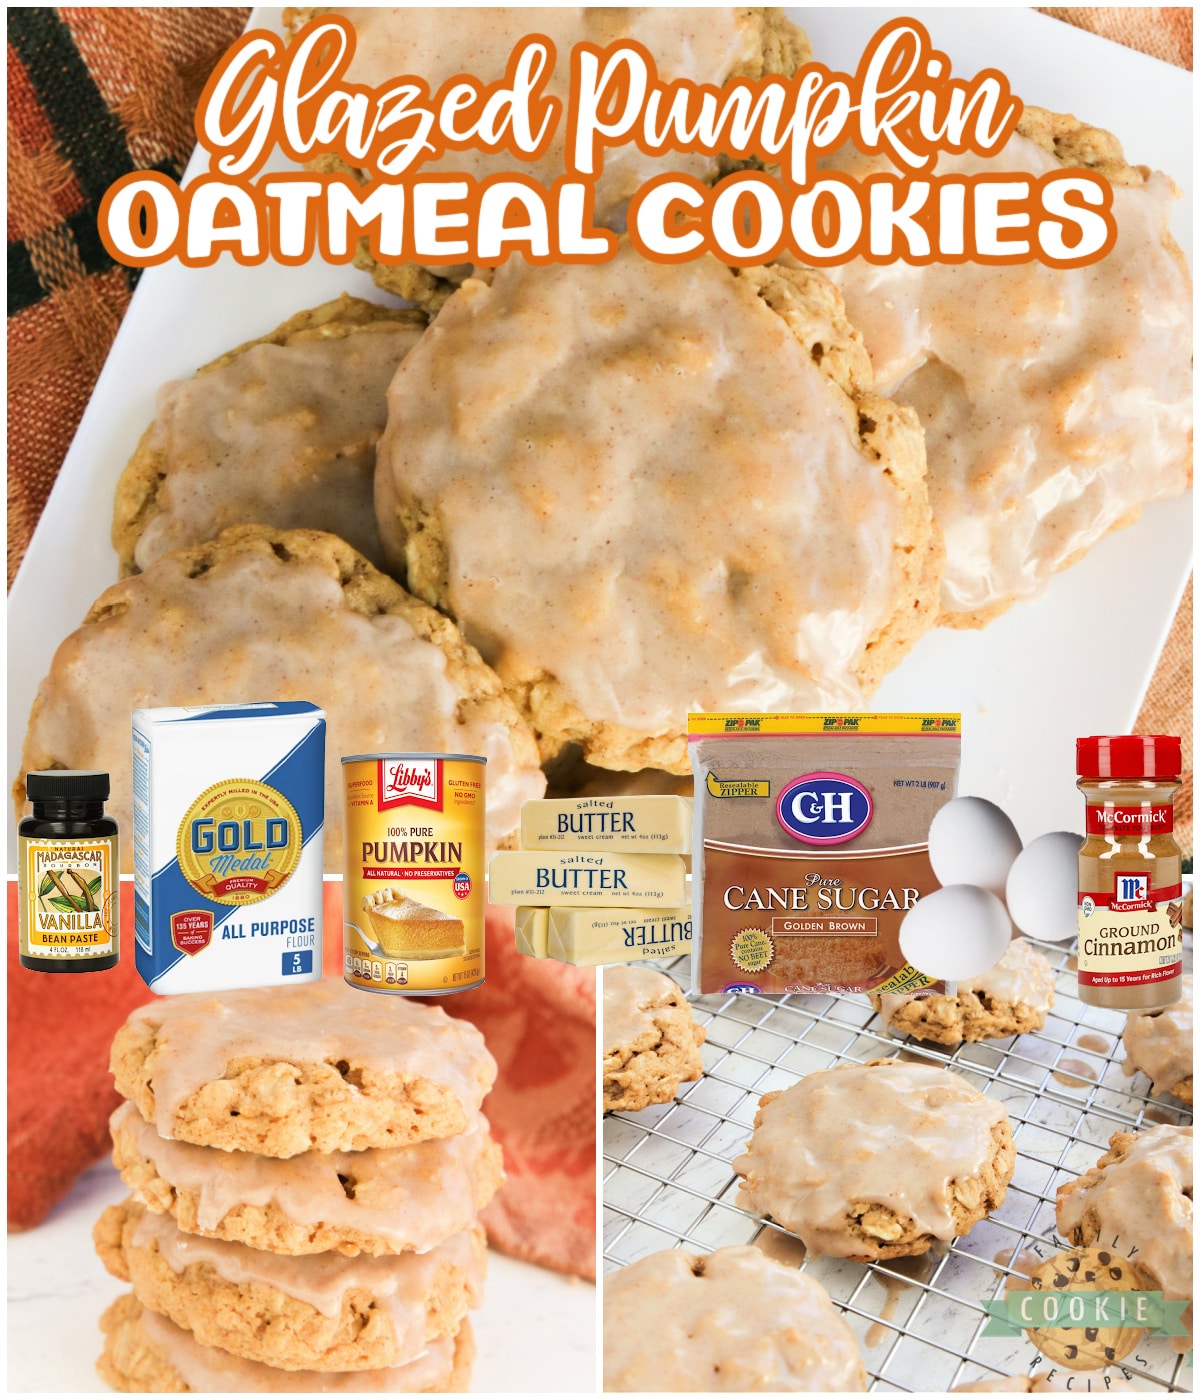 Glazed Pumpkin Oatmeal Cookies are soft, chewy oatmeal cookies packed with pumpkin and topped with a simple cinnamon sugar icing. The perfect cookie for fall!